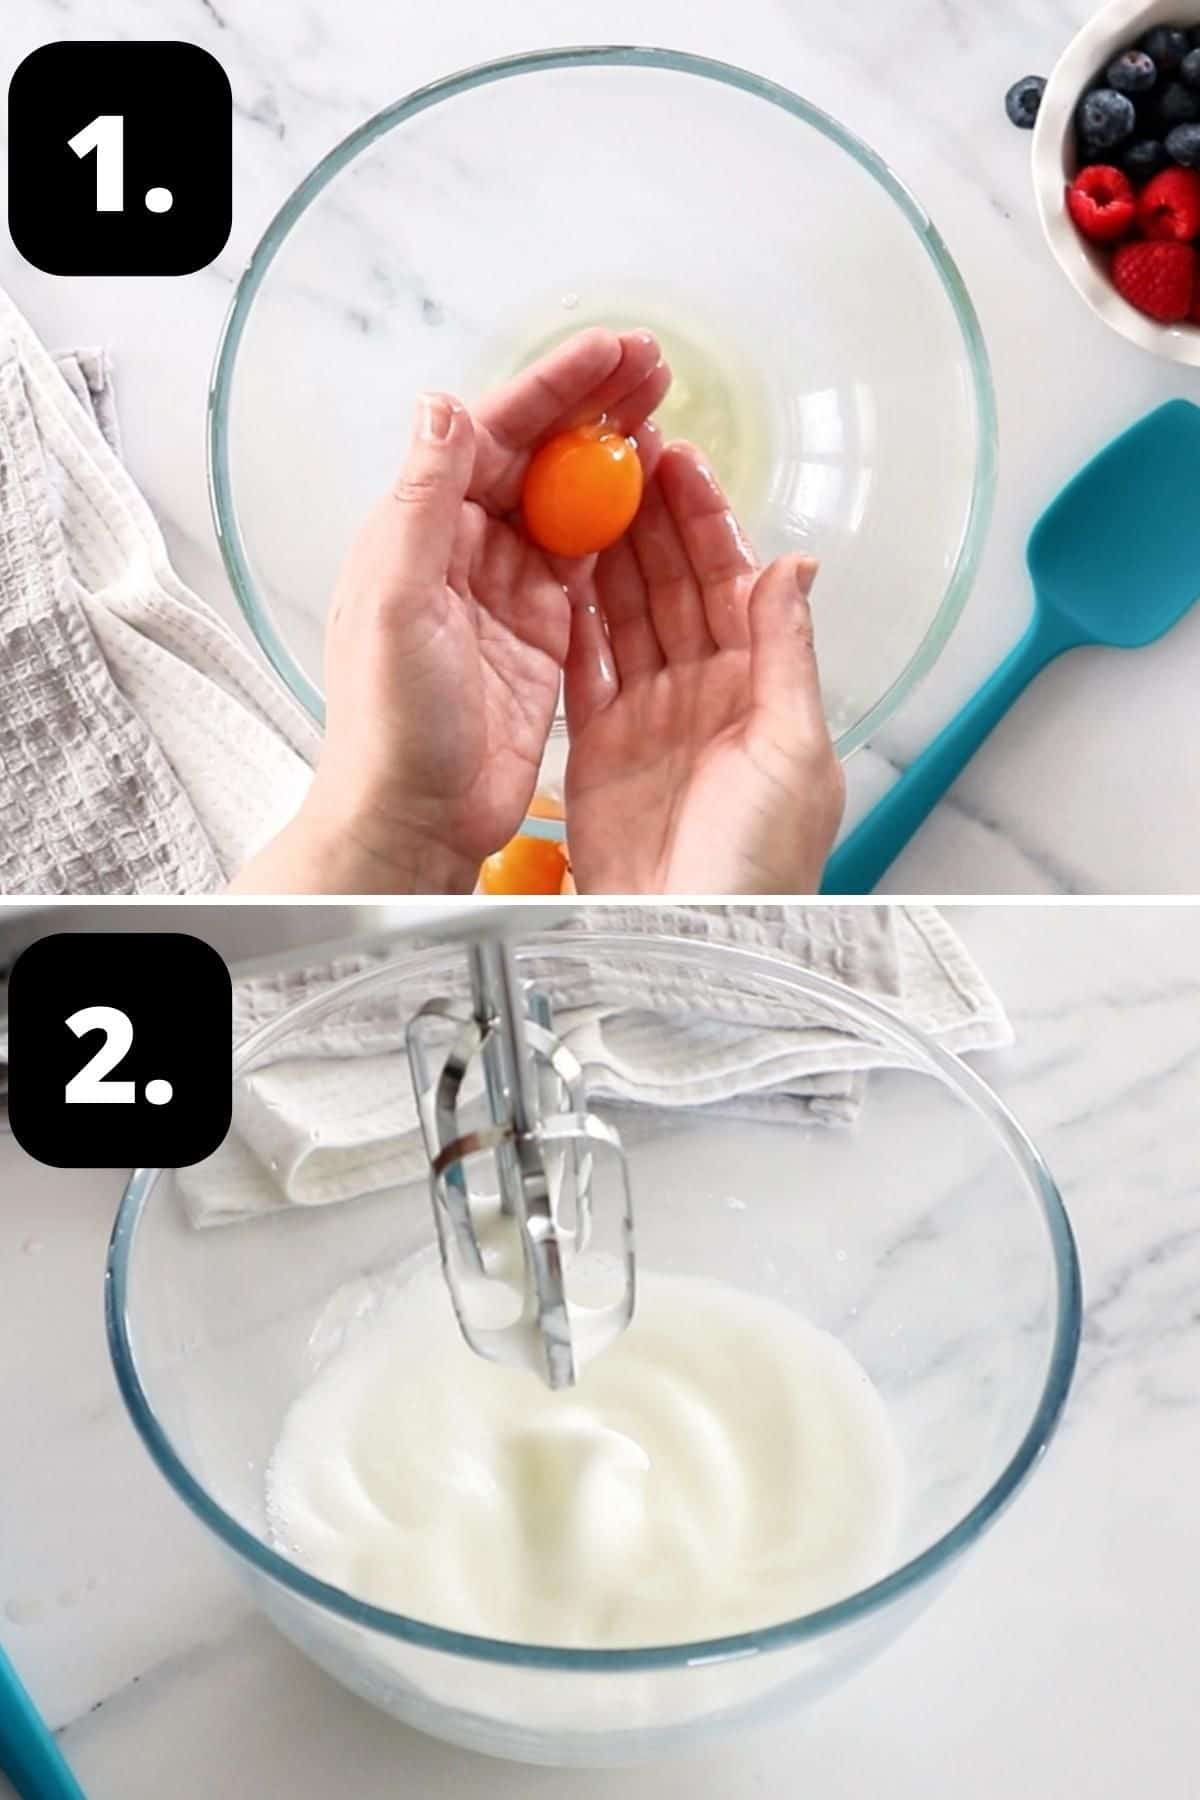 Steps 1-2 of preparing this recipe - separating the eggs and beating the egg whites in a glass bowl.